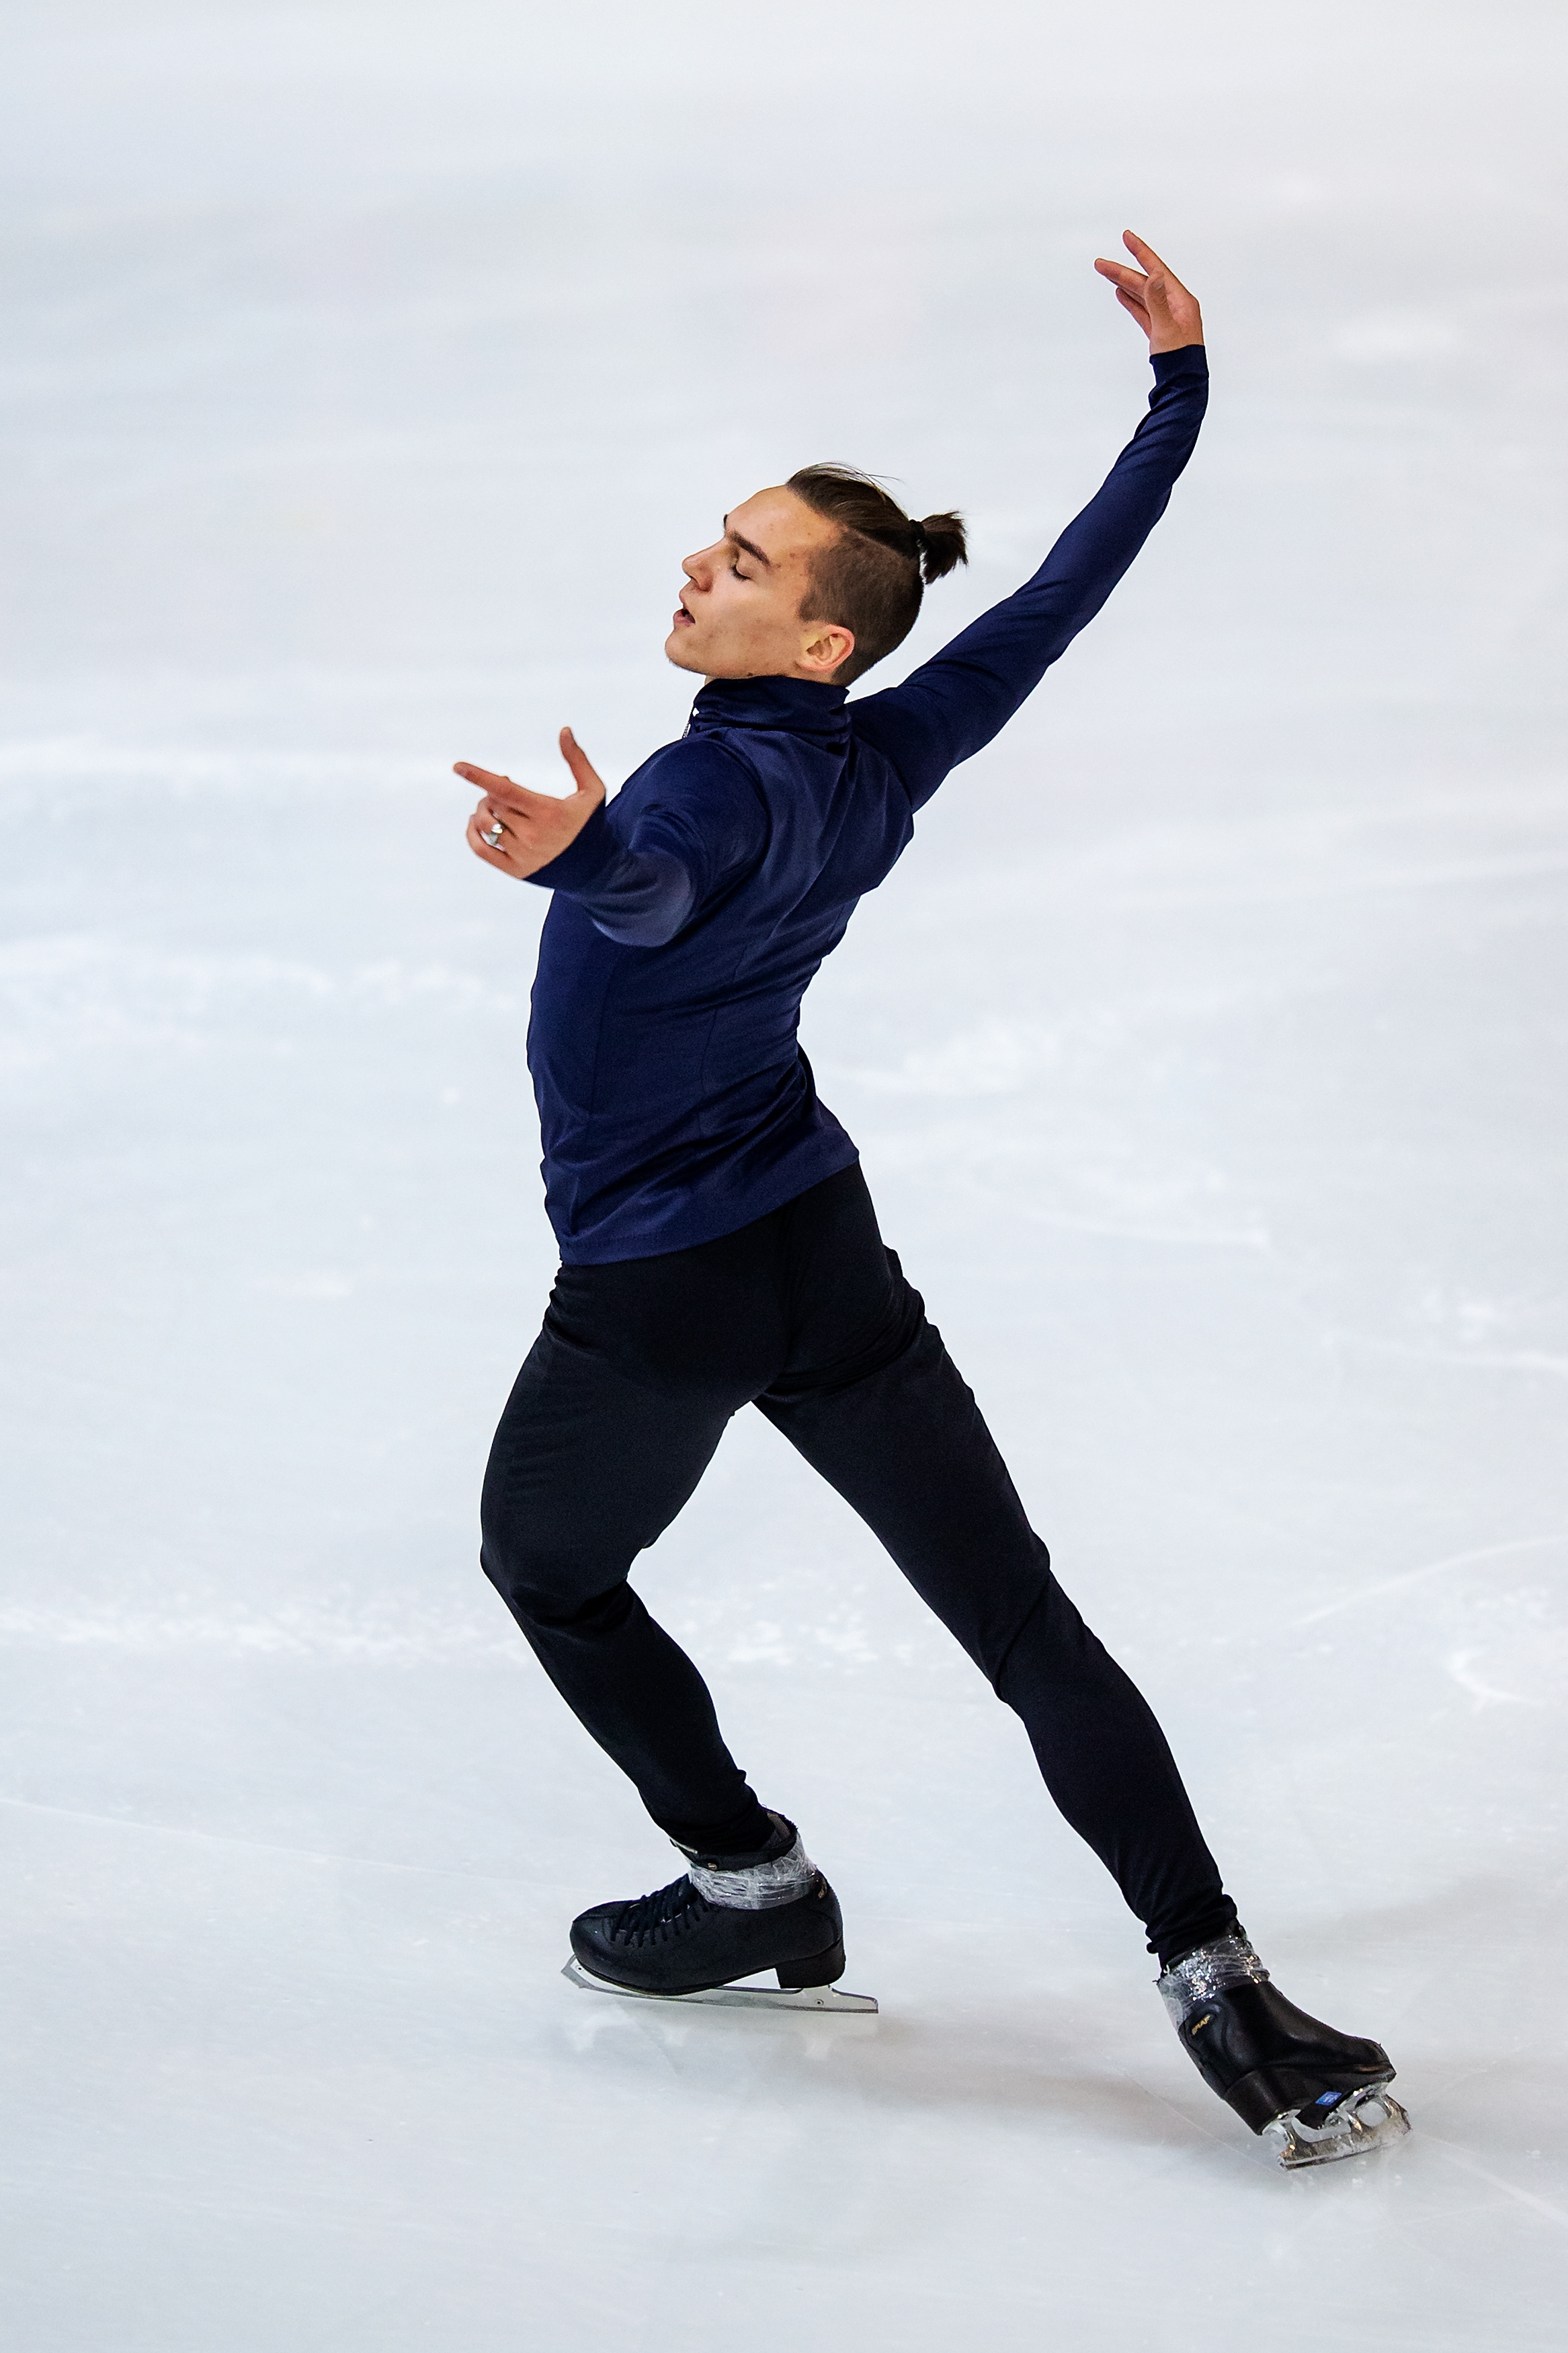 Anton Shulepov of Russia competes in the men's short program during day 1 of the ISU Grand Prix of Figure Skating Internationaux de France at Polesud Ice Skating Rink on Nov. 01, 2019 in Grenoble, France. (Joosep Martinson—Getty Images)